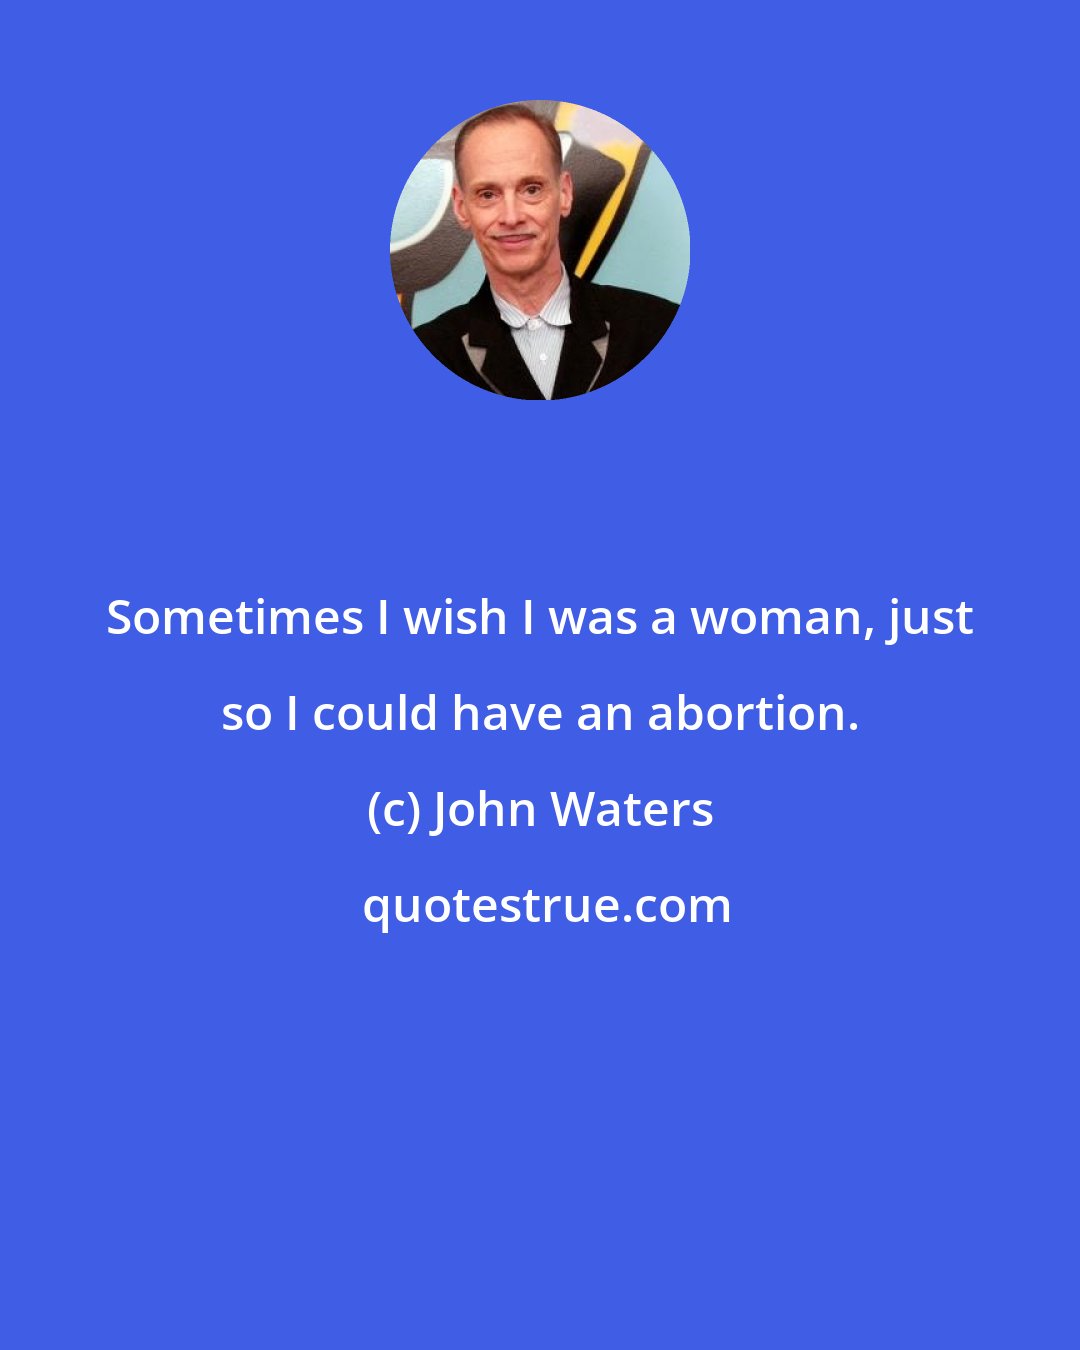 John Waters: Sometimes I wish I was a woman, just so I could have an abortion.